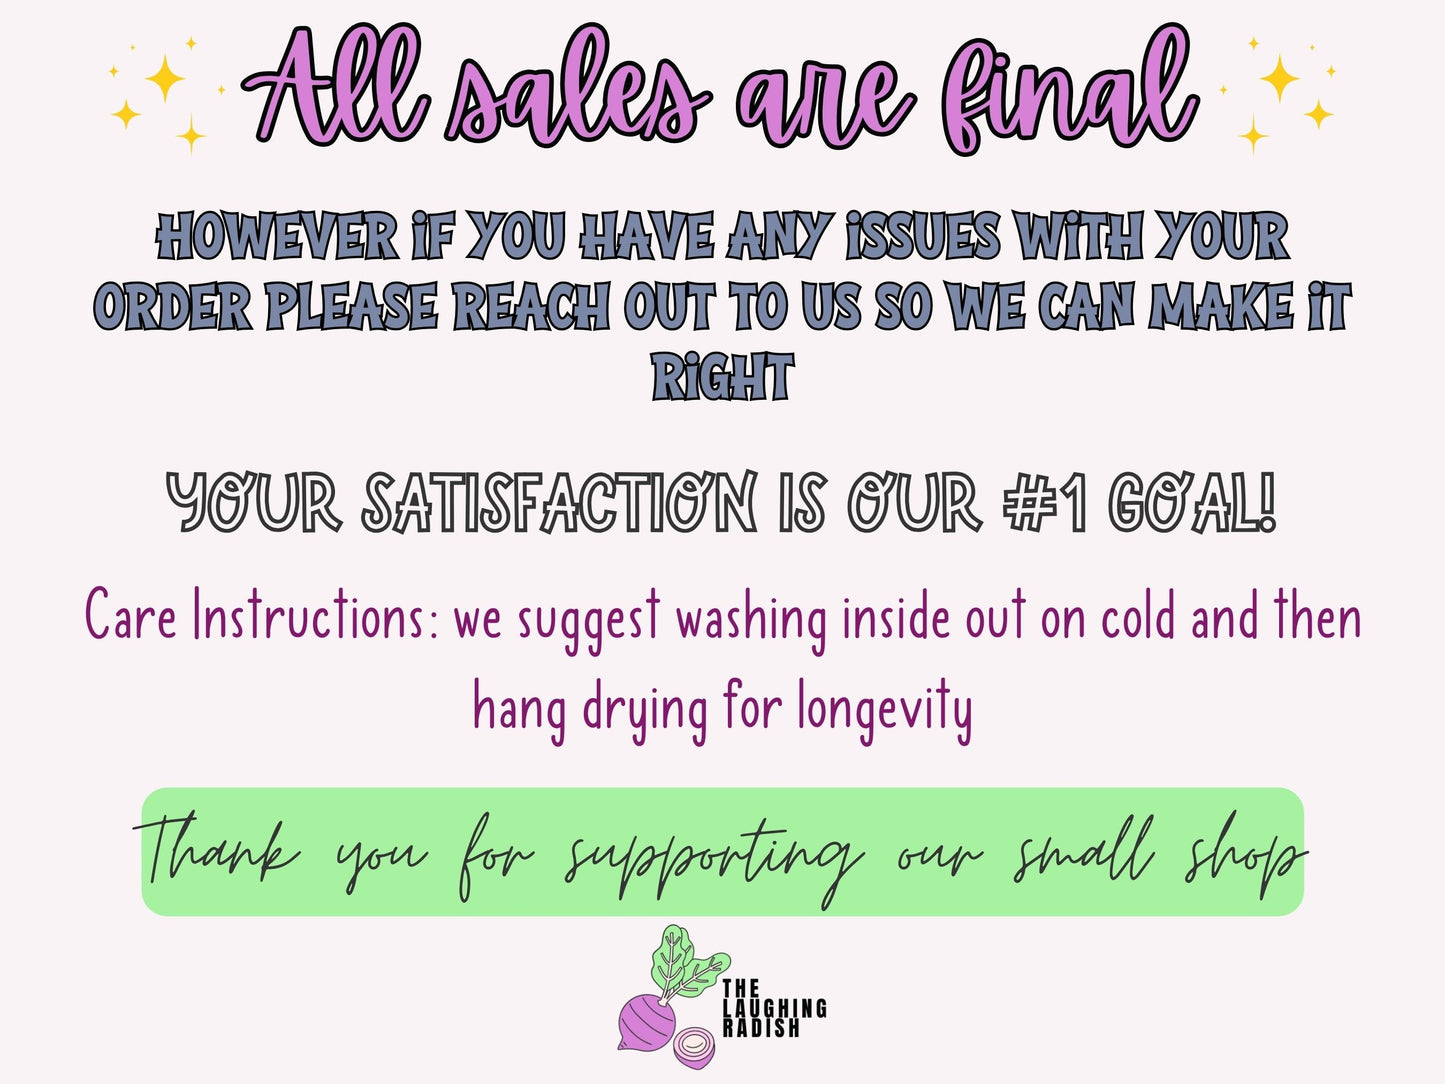 All sales are final. If you have any issues with your order, please reach out to us so we can make it right. Your satisfaction is our number one goal! Care instructions: we suggest washing inside out on cold, then hang drying for longevity.